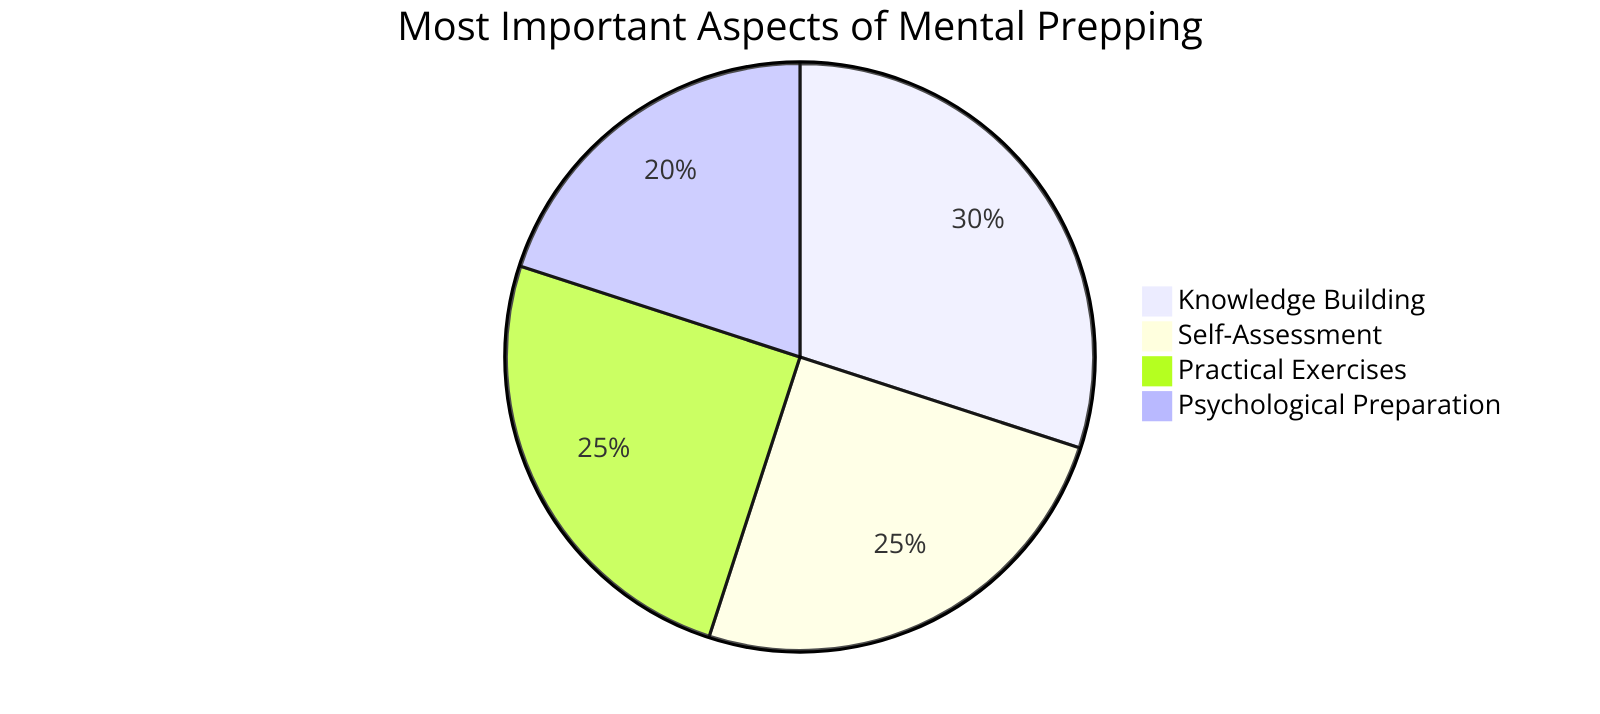  the most important aspects of mental prepping